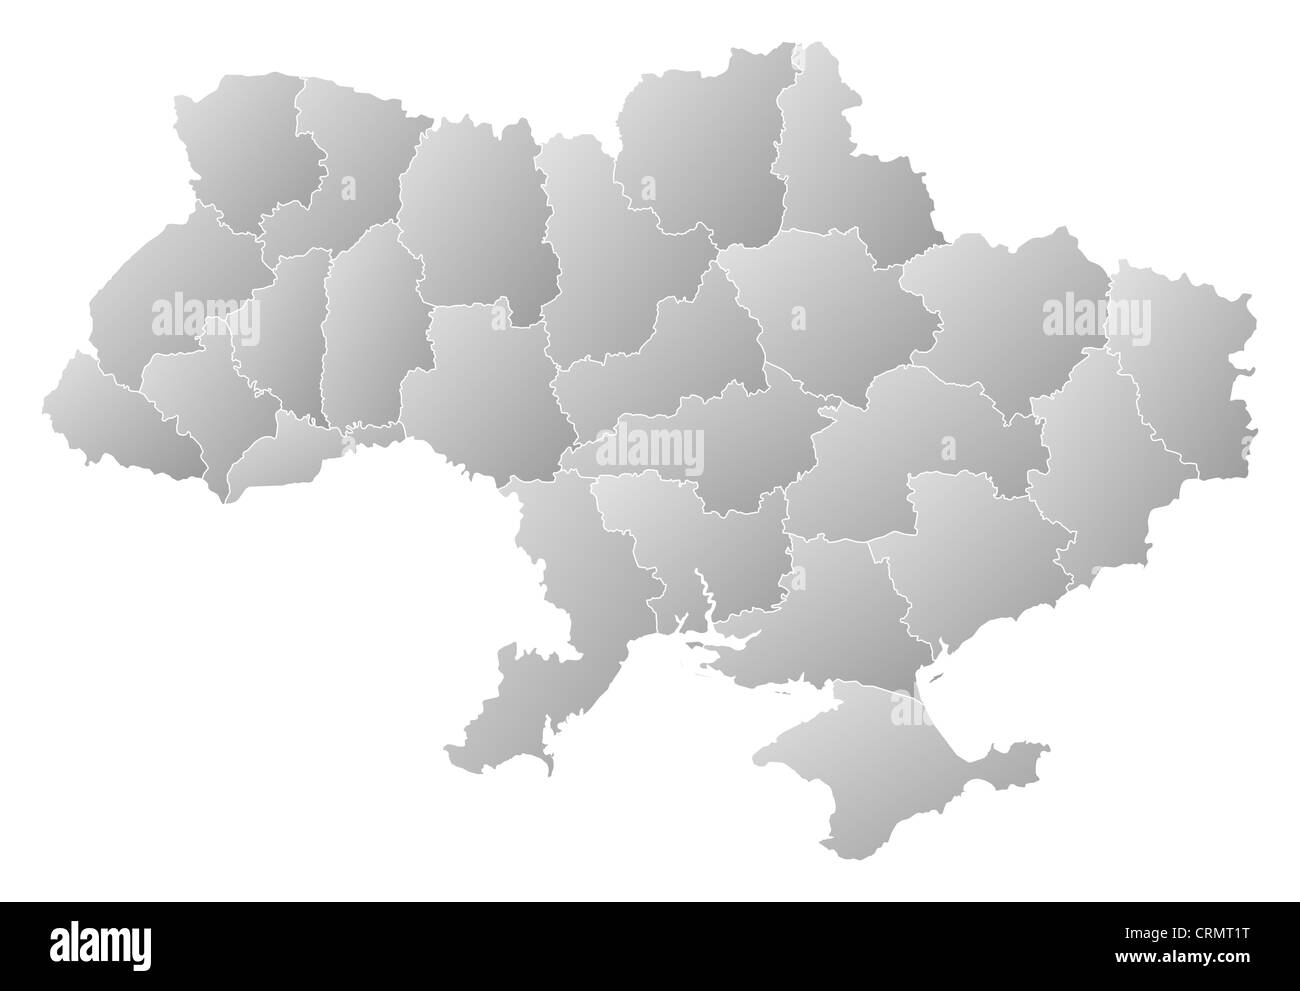 Political map of Ukraine with the several oblasts. Stock Photo